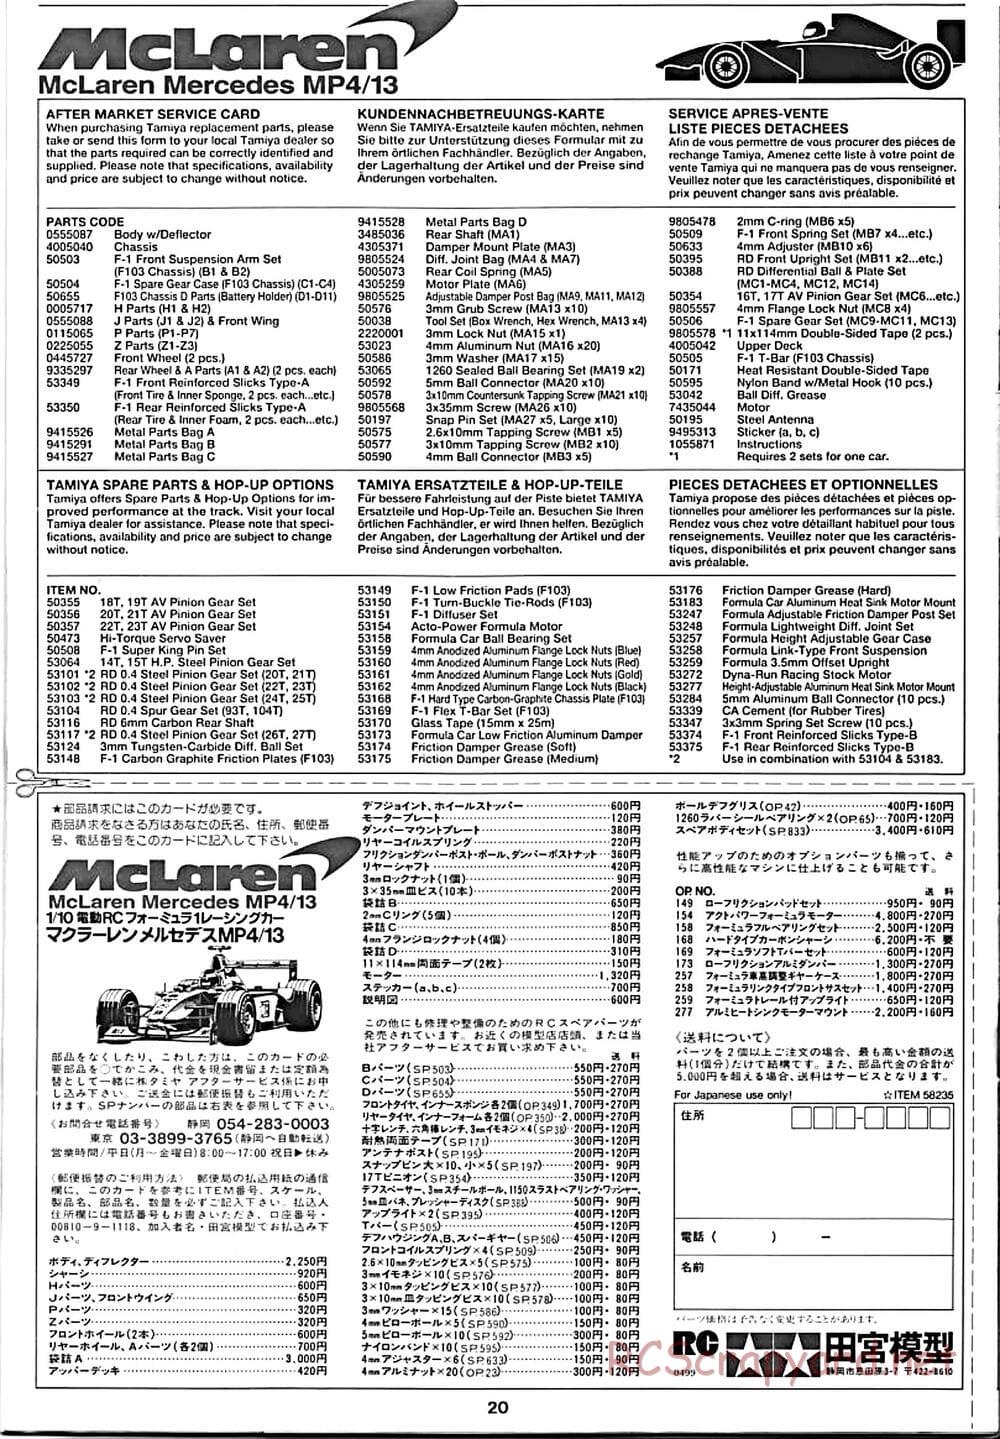 Tamiya - McLaren Mercedes MP4/13 - F103RS Chassis - Manual - Page 20